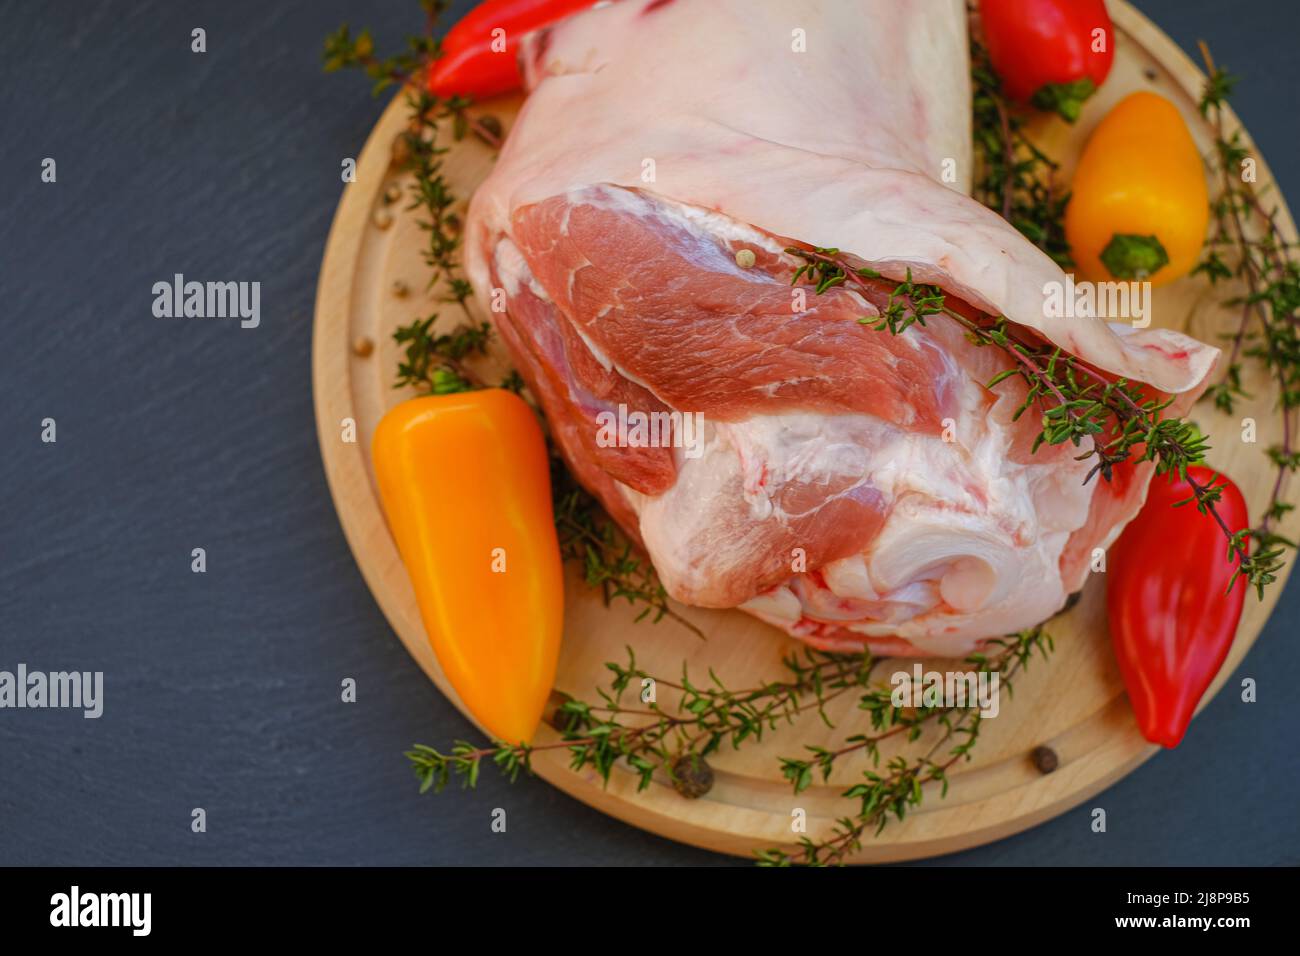 Pork meat on the bone, sweet fresh pepper and thyme herb on a round wooden board on a slate background.Meat products. Stock Photo